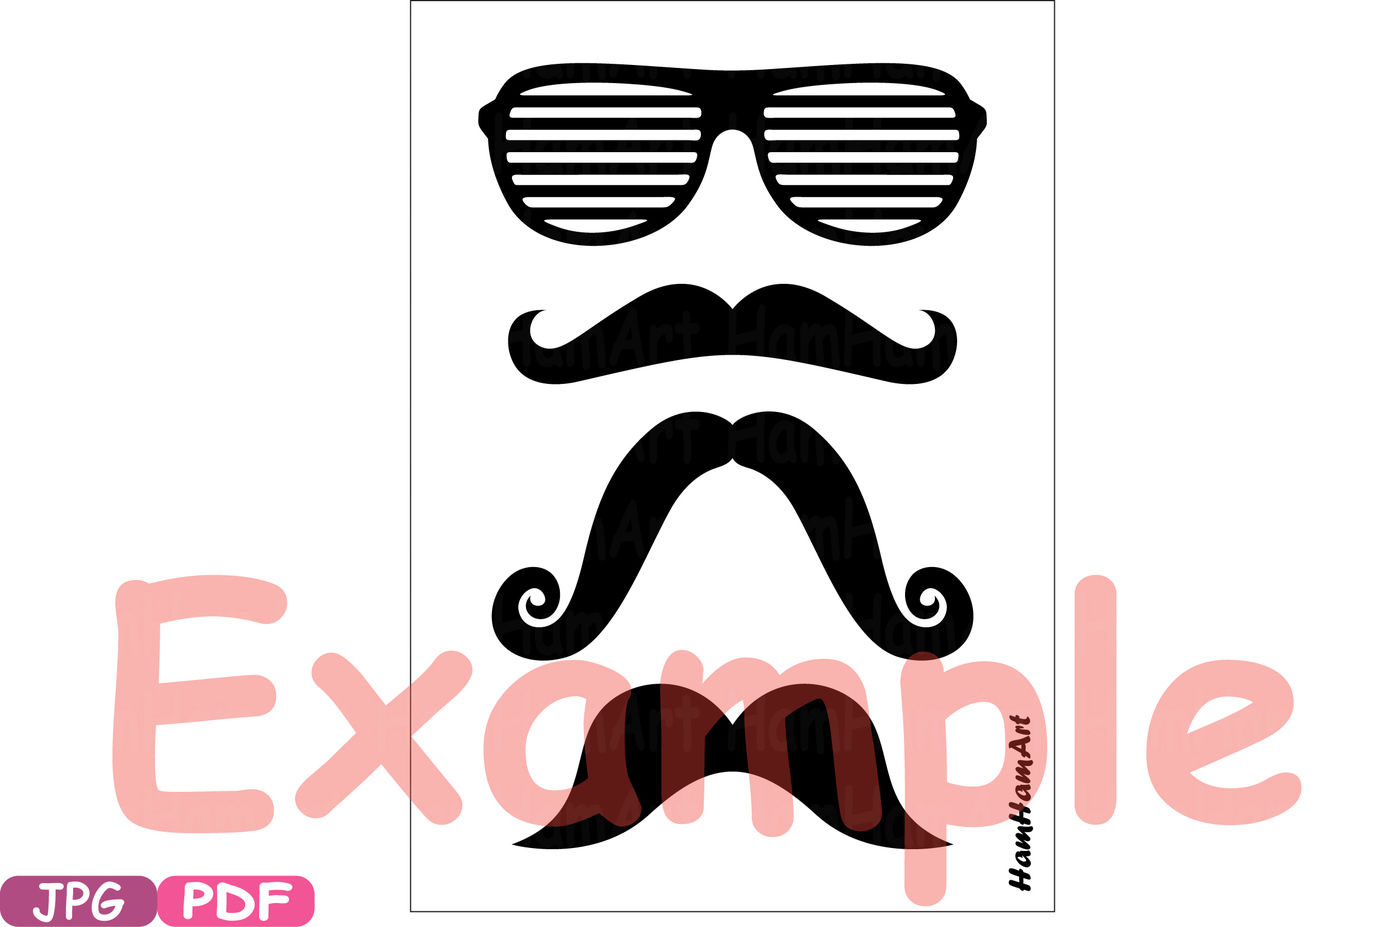 Mrs svg Photo booth props Couple svg cut Glasses svg Mr svg Photo booth clipart Mustaches svg Pair svg Human faces Retro people svg